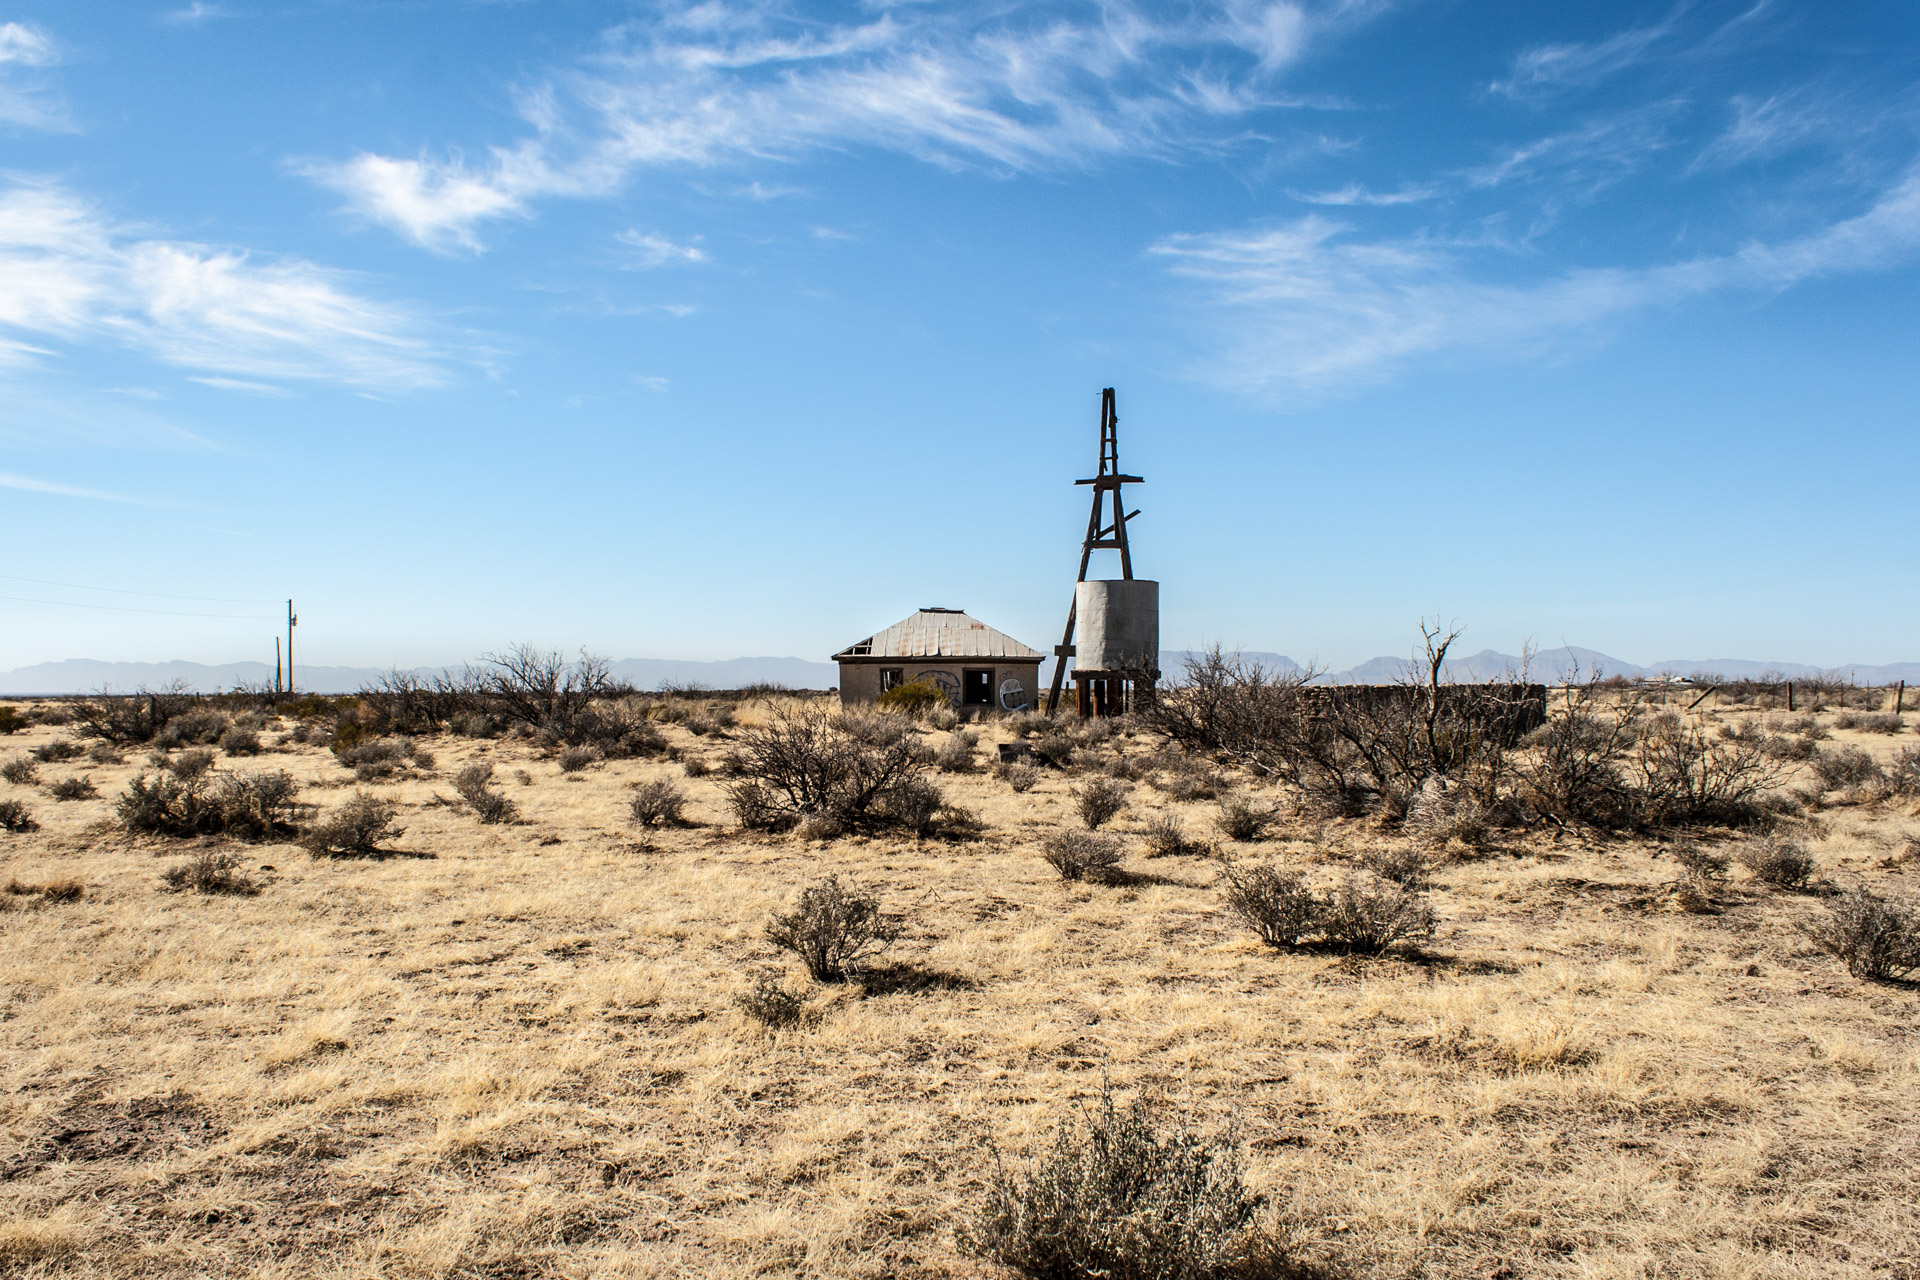 Tularosa, New Mexico - A Desert House With An Extra Large Well (front far)